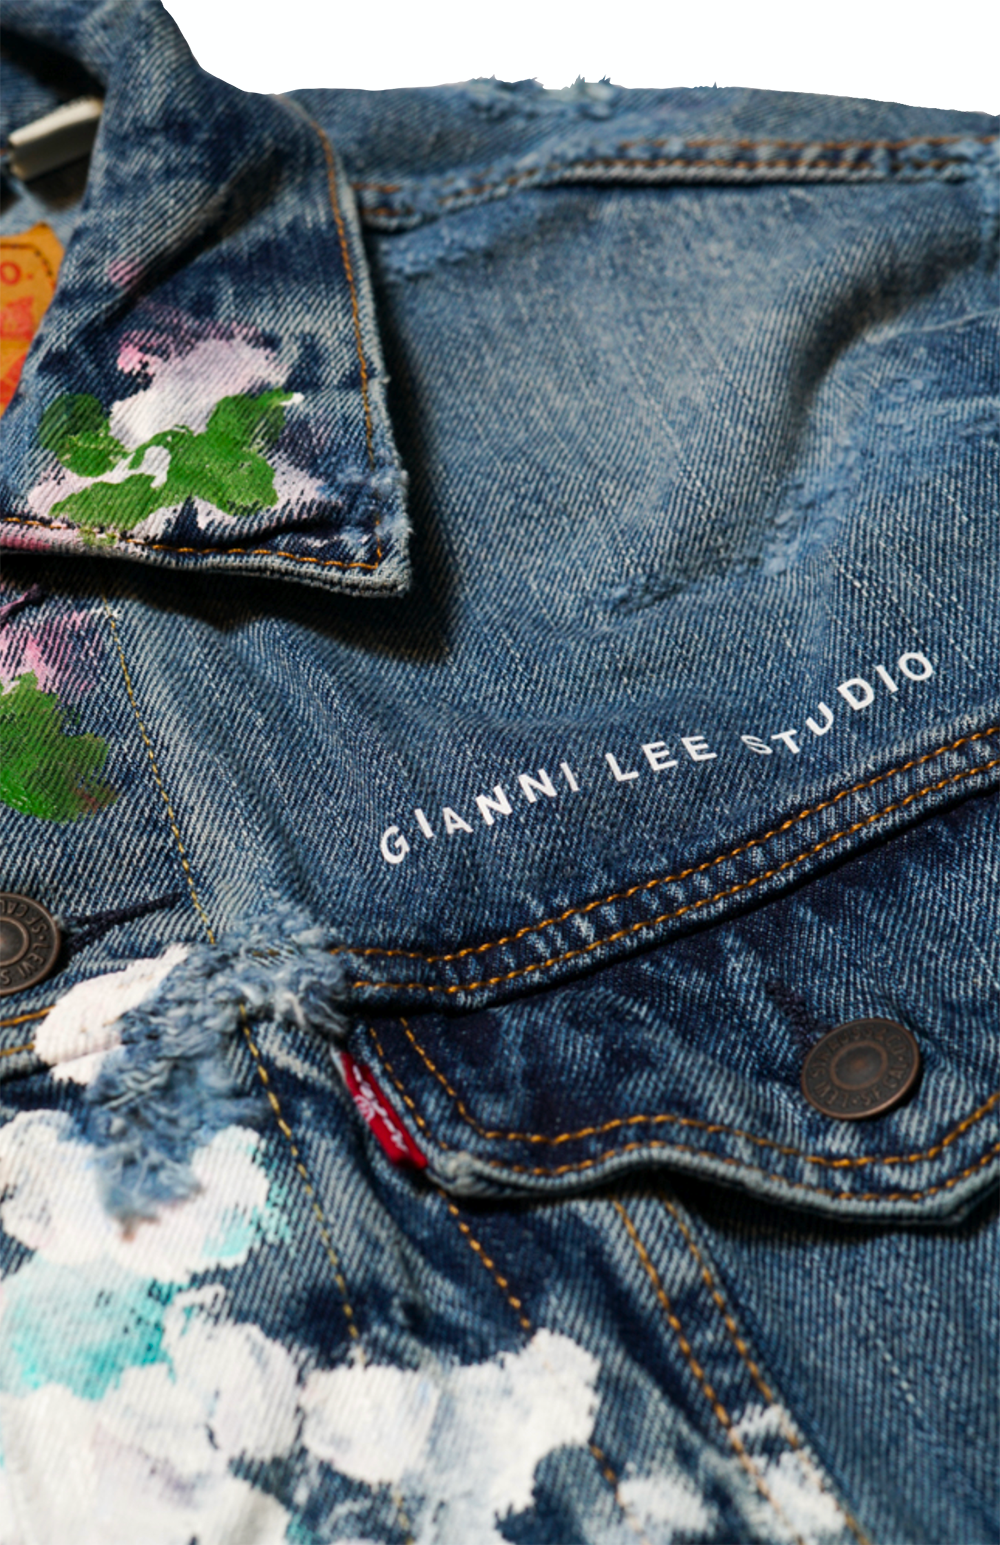 LEVI'S® x GIANNI LEE x 76ERS "HAND-PAINTED" TRUCKER JACKET